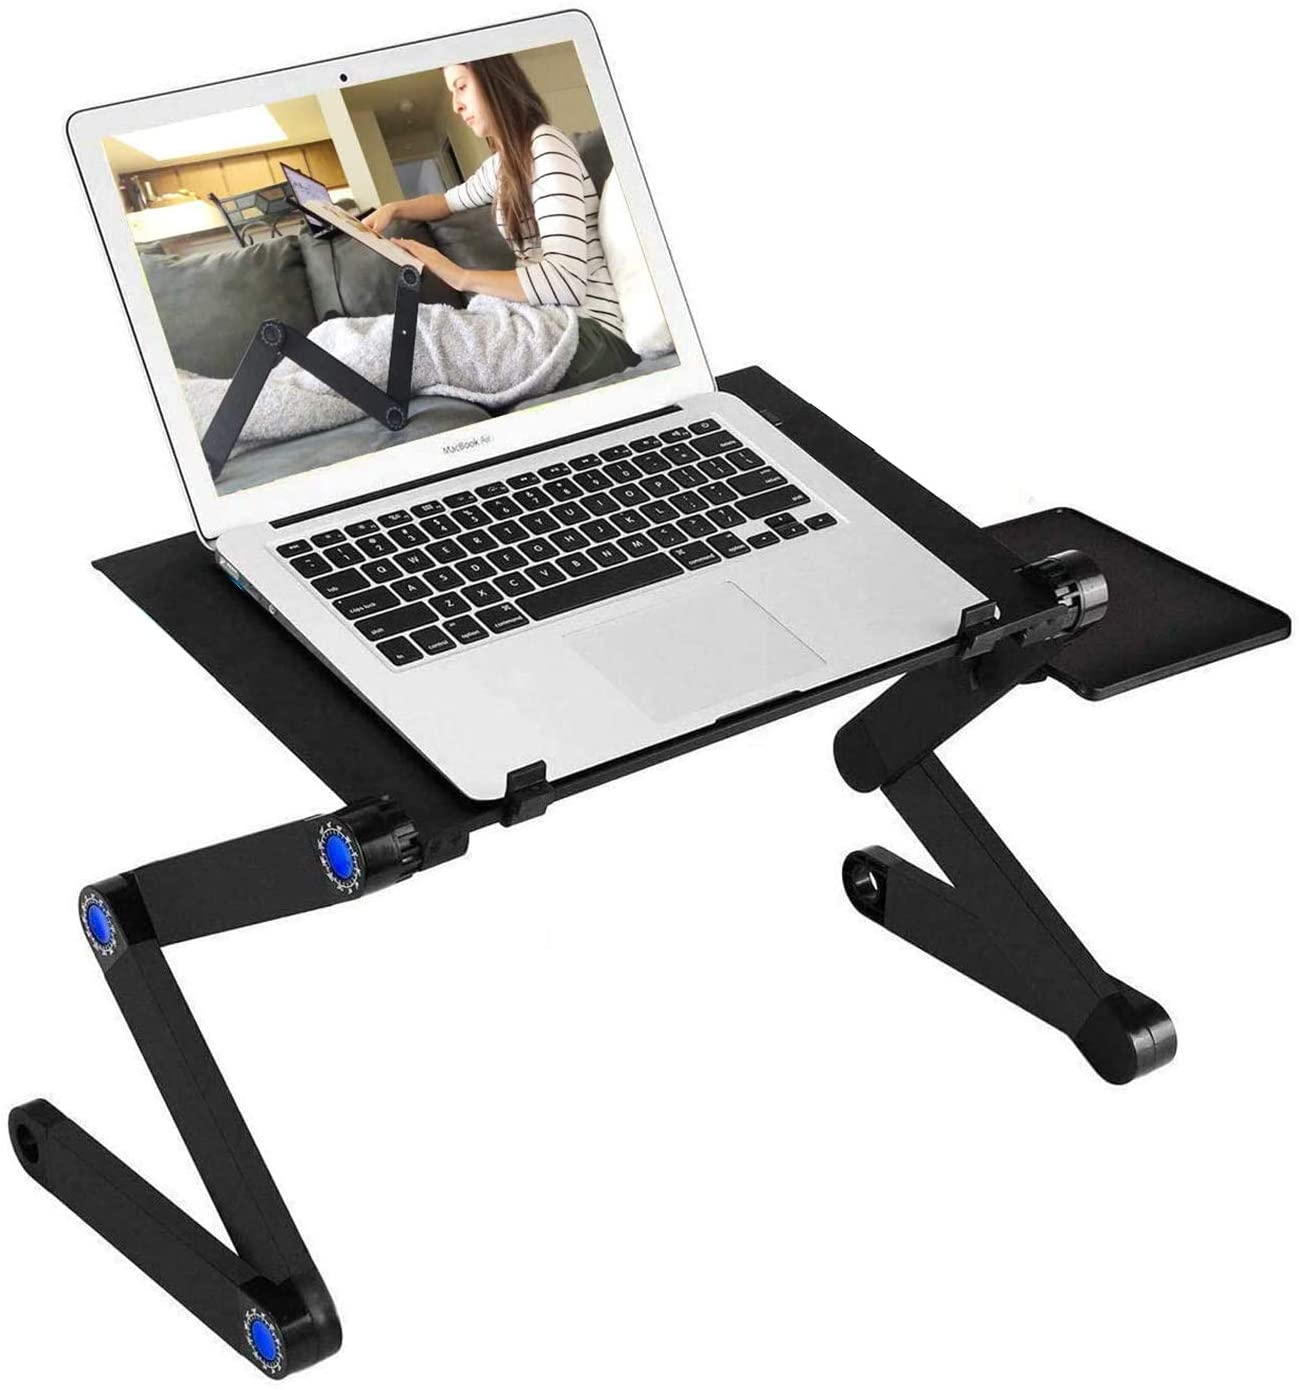 Adjustable Laptop Stand, RAINBEAN Laptop Desk with 2 CPU Cooling USB Fans for Bed Aluminum Lap Workstation Desk with Mouse Pad, Foldable Cook Book Stand Notebook Holder